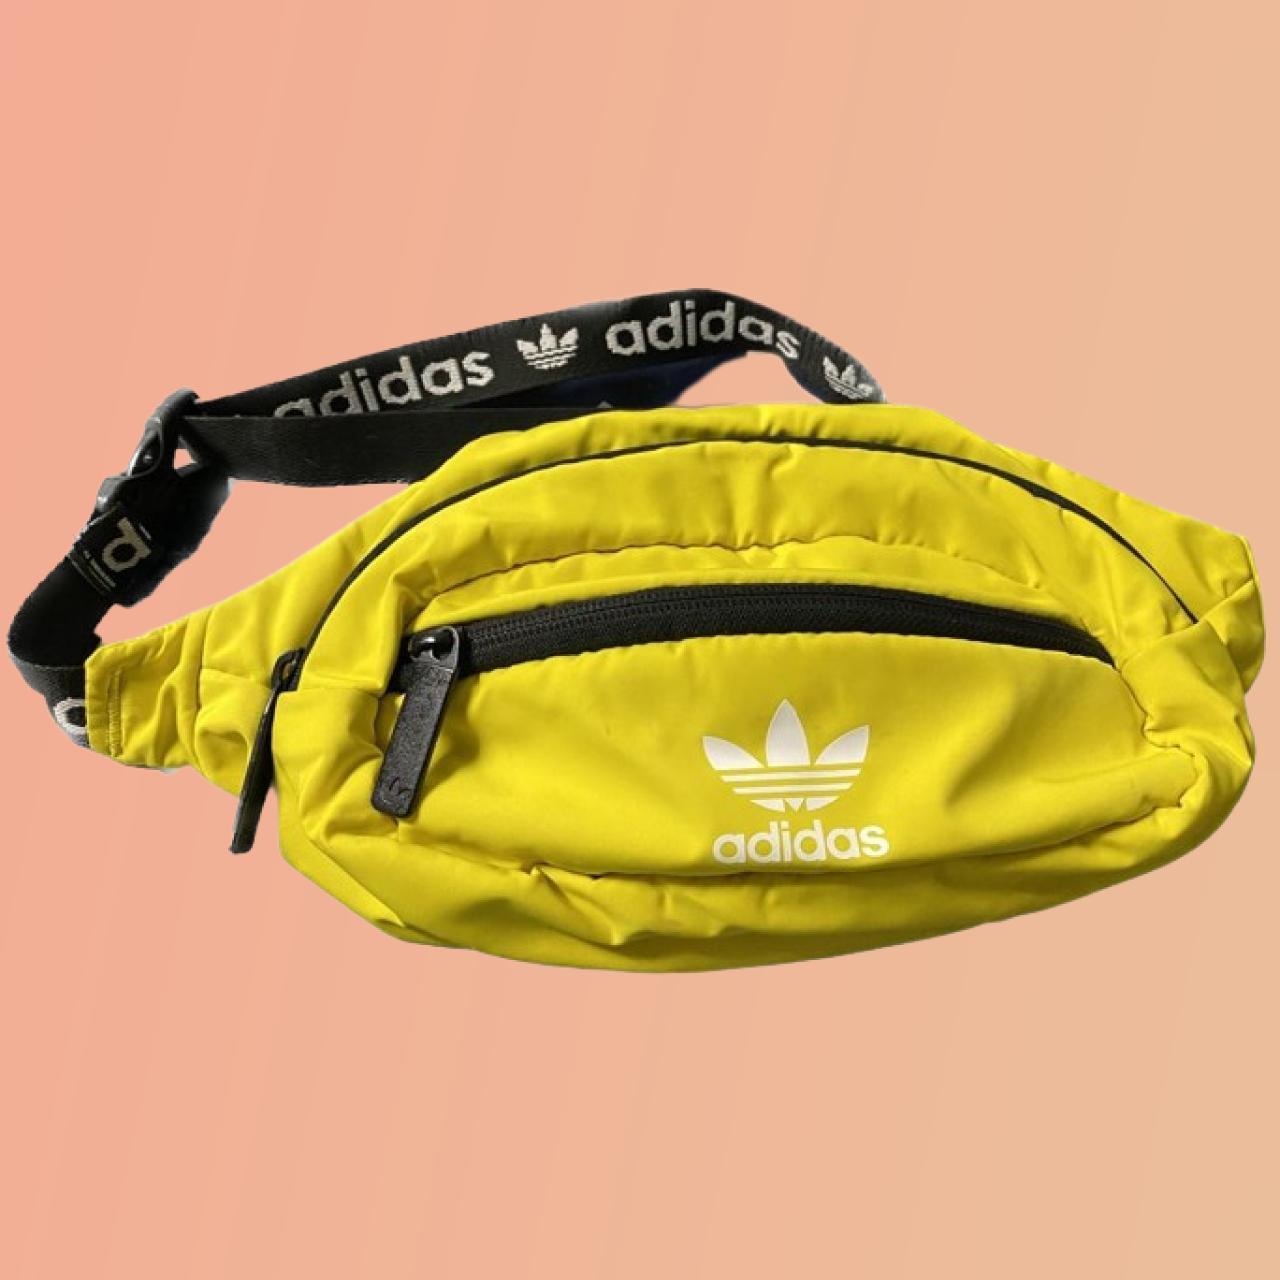 Yellow adidas waist bag for athletic wear and... Depop